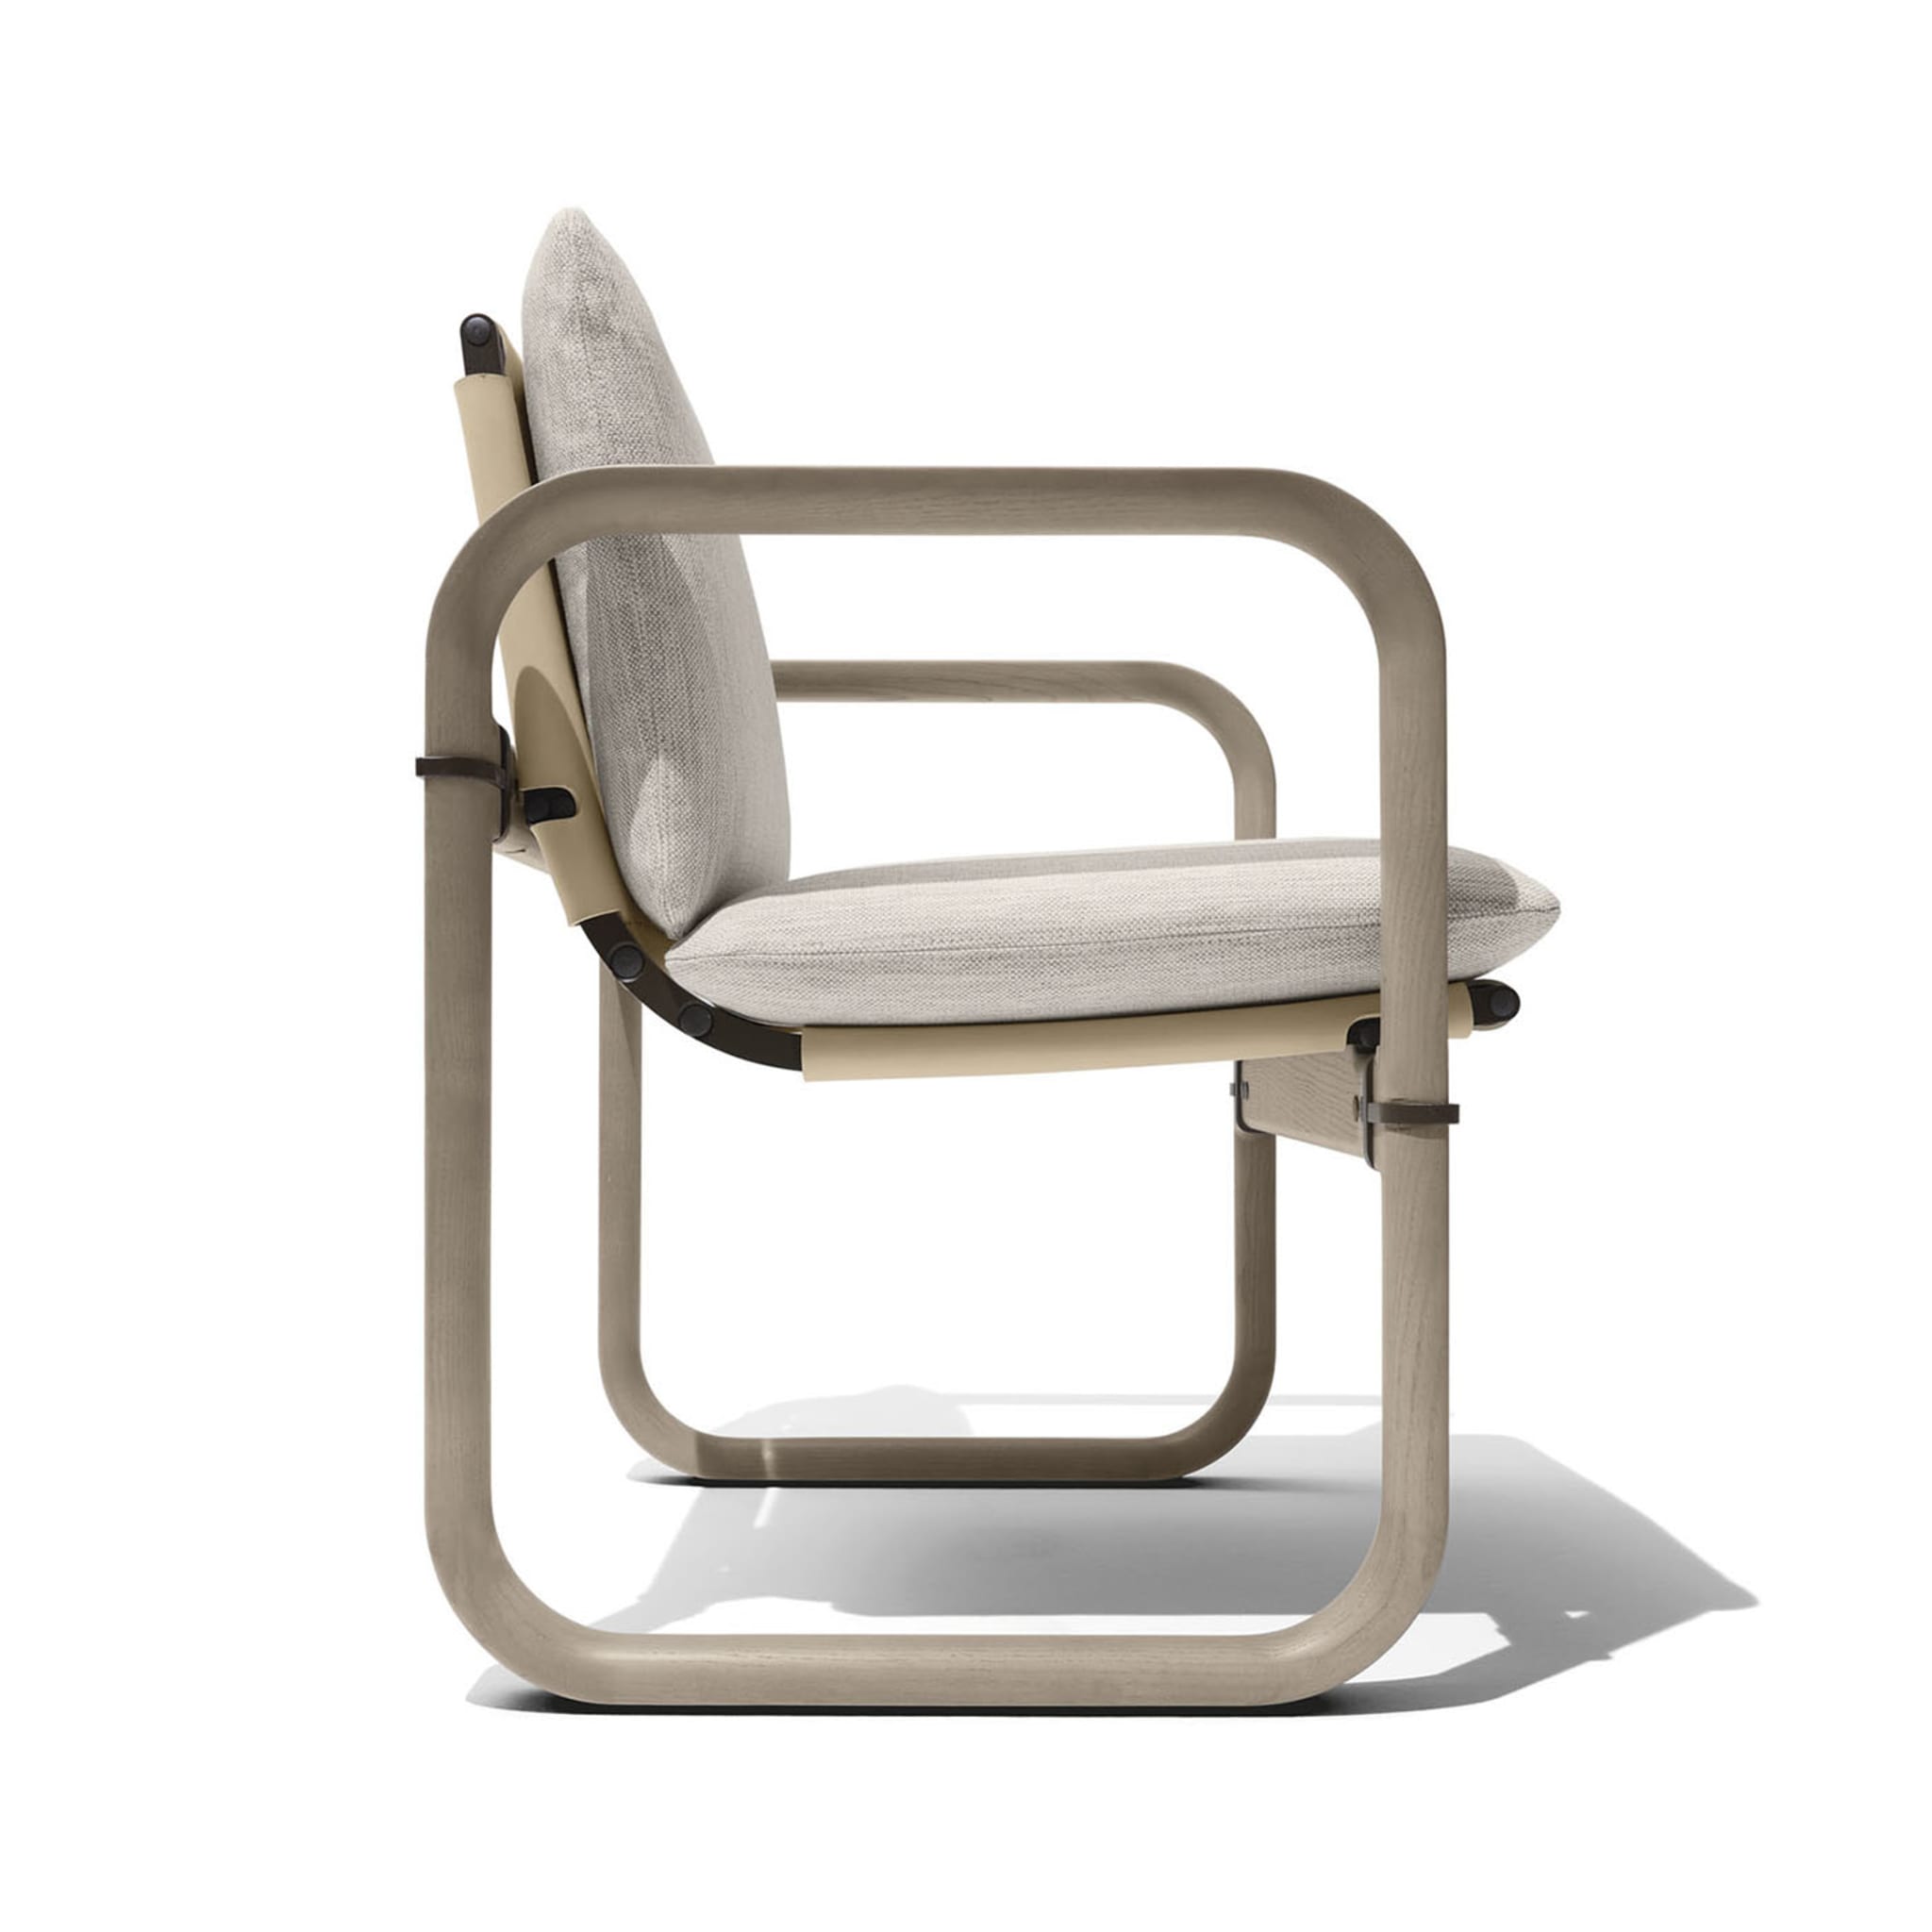 Loop Outdoor Chair by Ludovica+Roberto Palomba - Alternative view 1